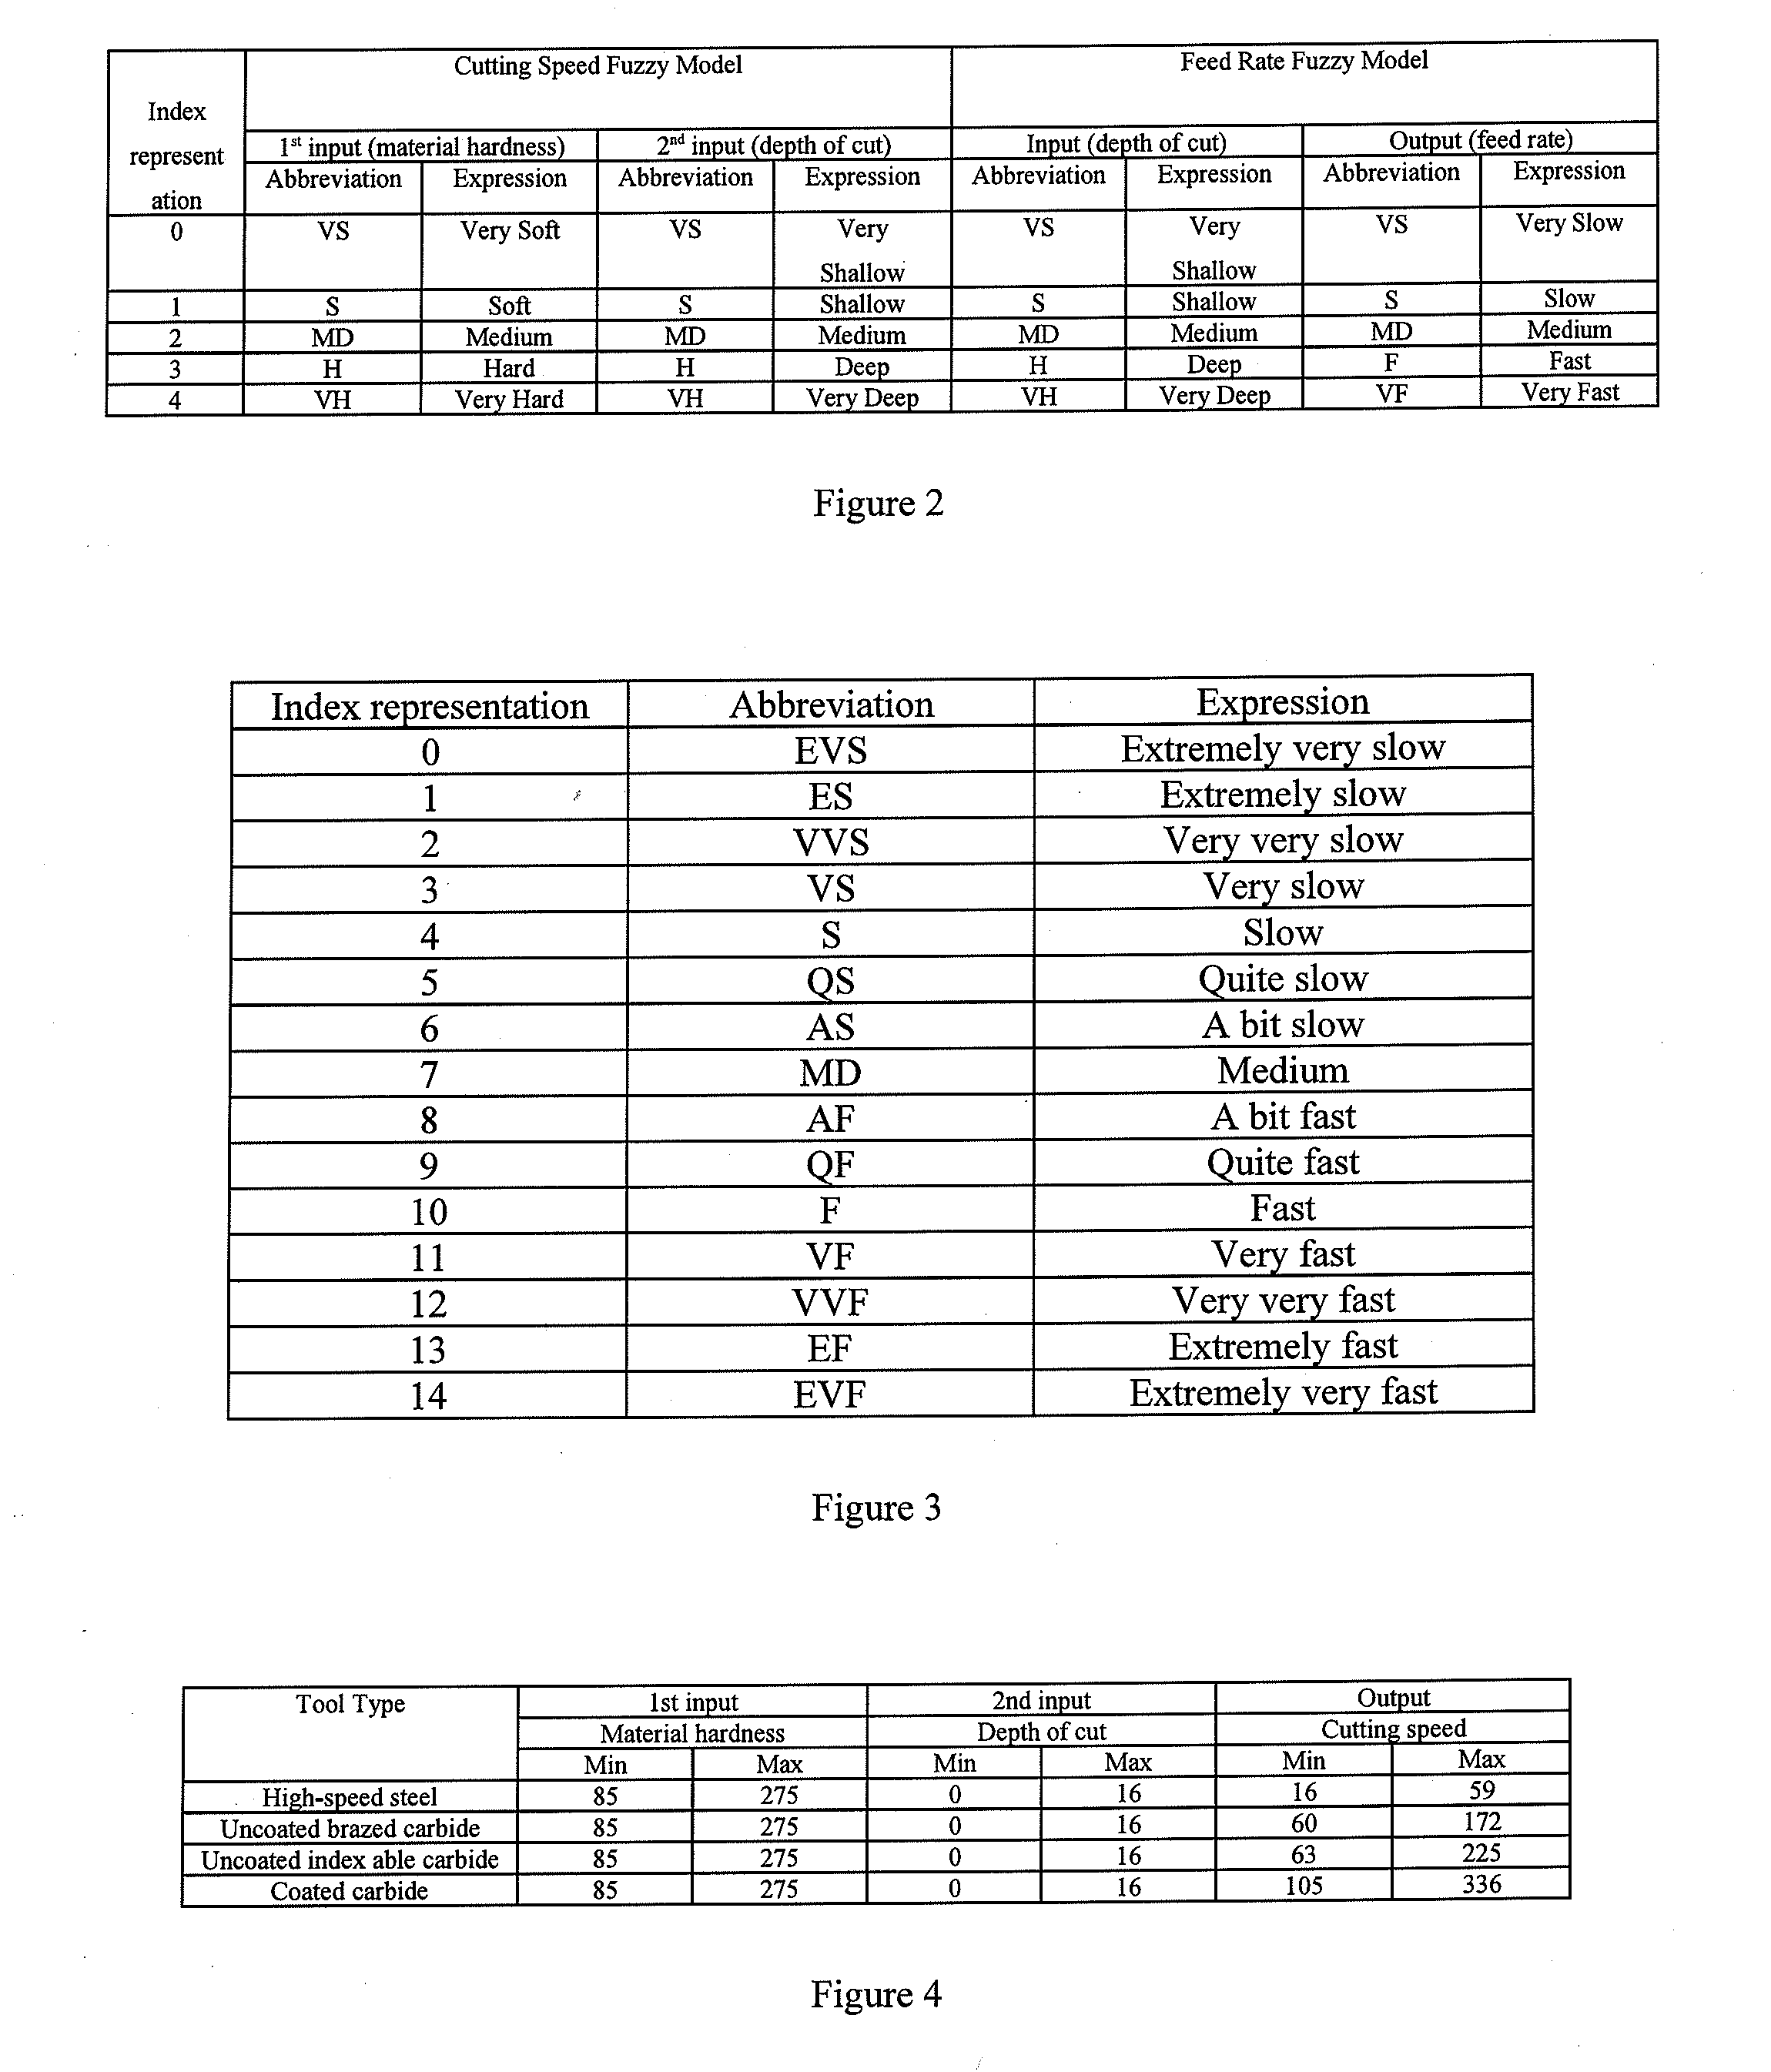 Artificial intelligence device and corresponding methods for selecting machinability data